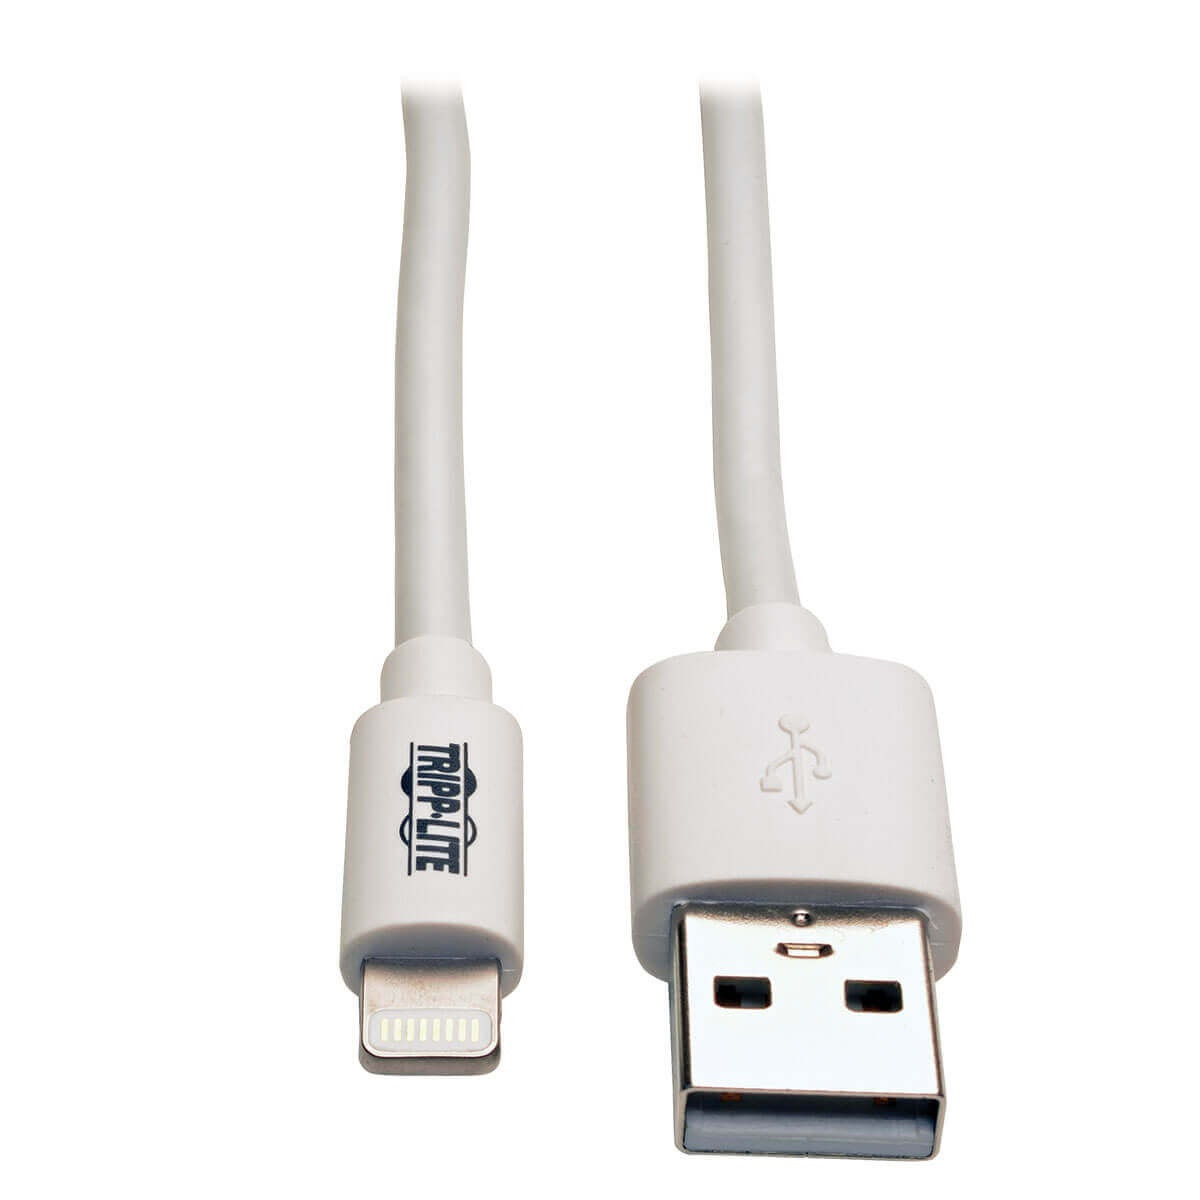 Кабель TrippLite/USB/USB-A to Lightning Sync/Charge Cable, MFi Certified - White, M/M, USB 2.0, 3 ft